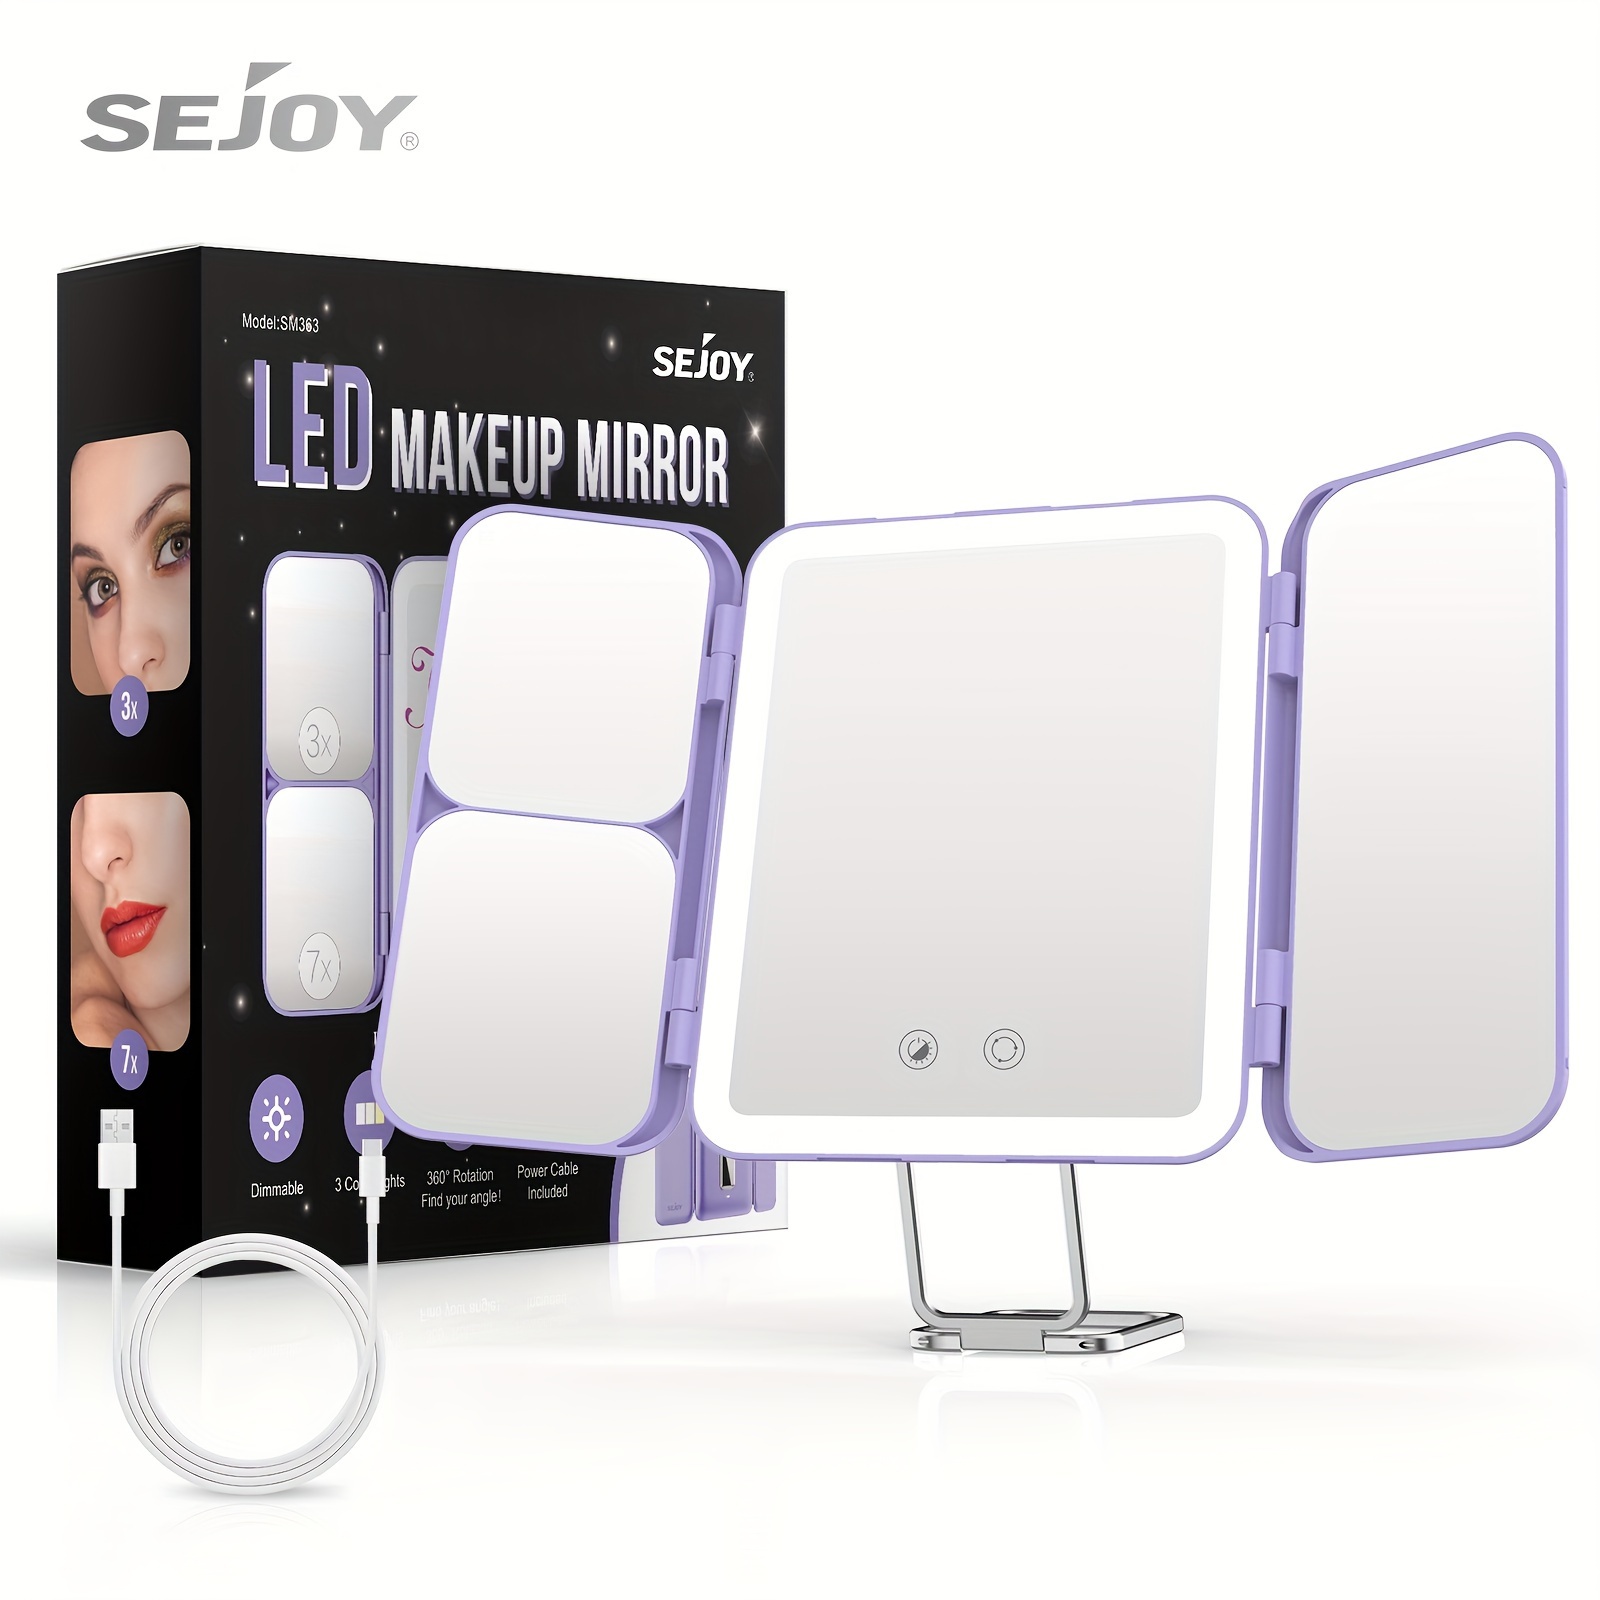 

Sejoy Tri-fold Makeup Mirror Vanity Mirror With 3 Color Led Lights X1/x3/x7 Magnification Rechargeable Travel Mirror Touch Screen, Purple & White